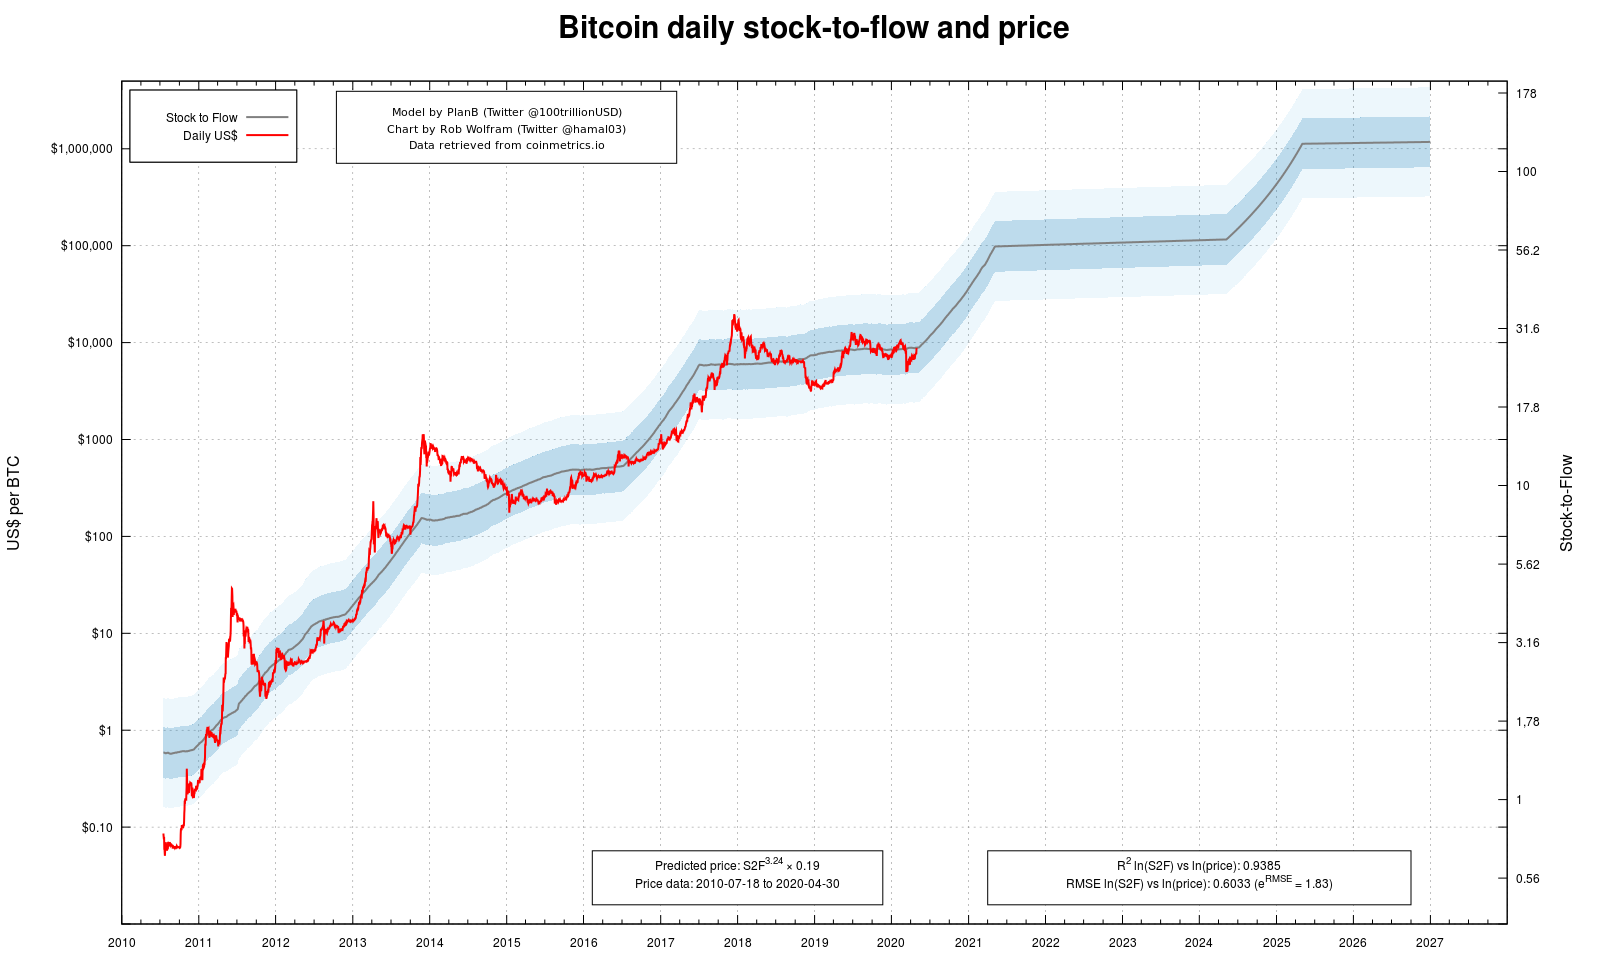 BTC price compared to its stock-to-flow